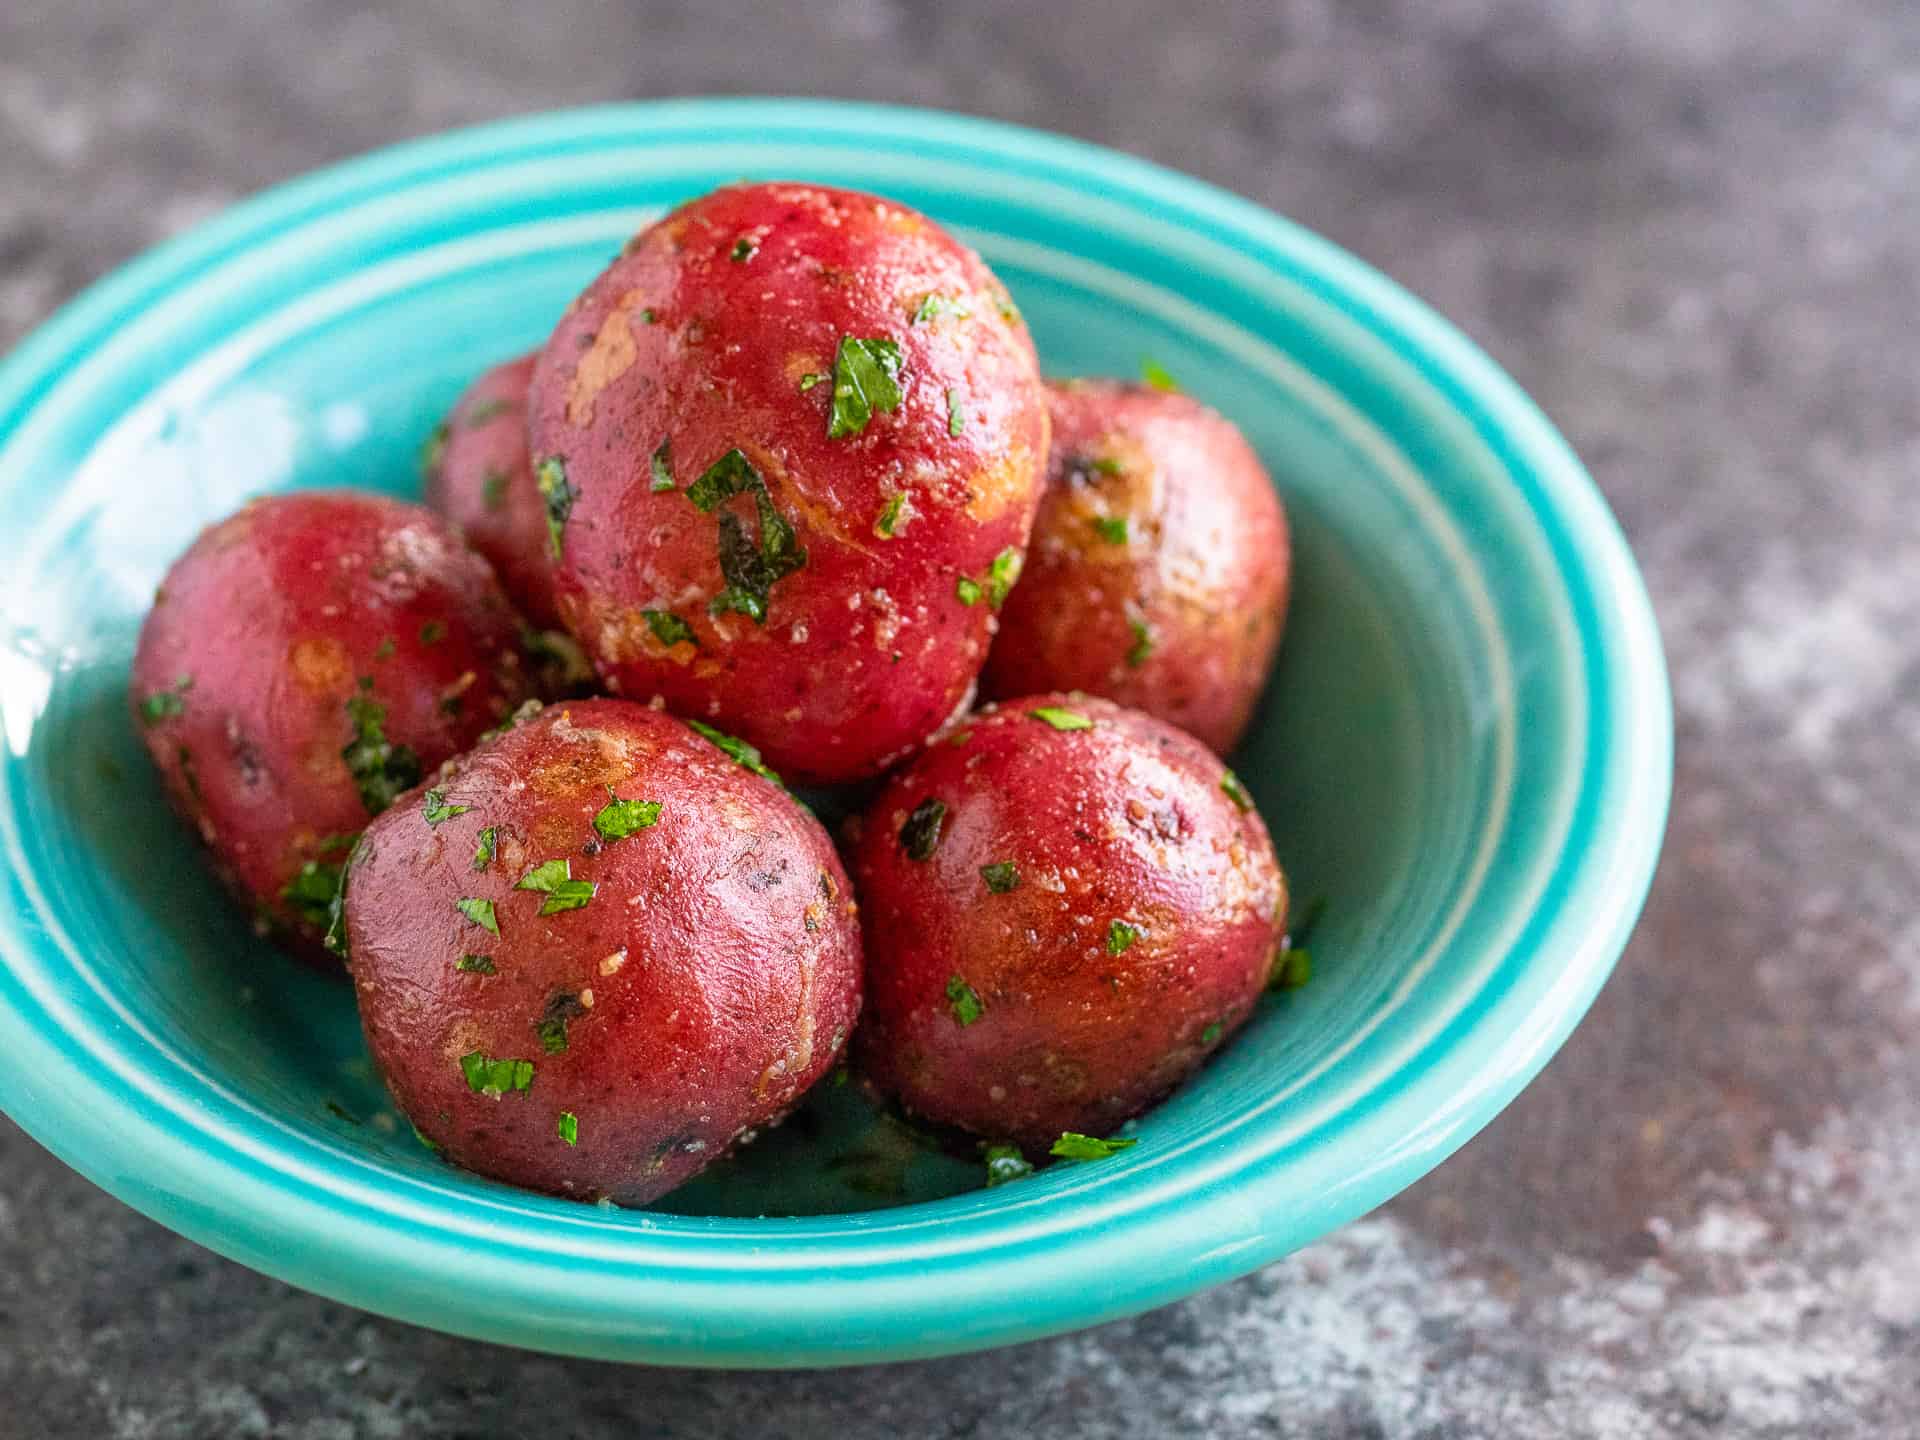 https://www.dadcooksdinner.com/wp-content/uploads/2018/05/Pressure-Cooker-Baby-Red-Potatoes-with-Butter-and-Parsley-00400-1.jpg